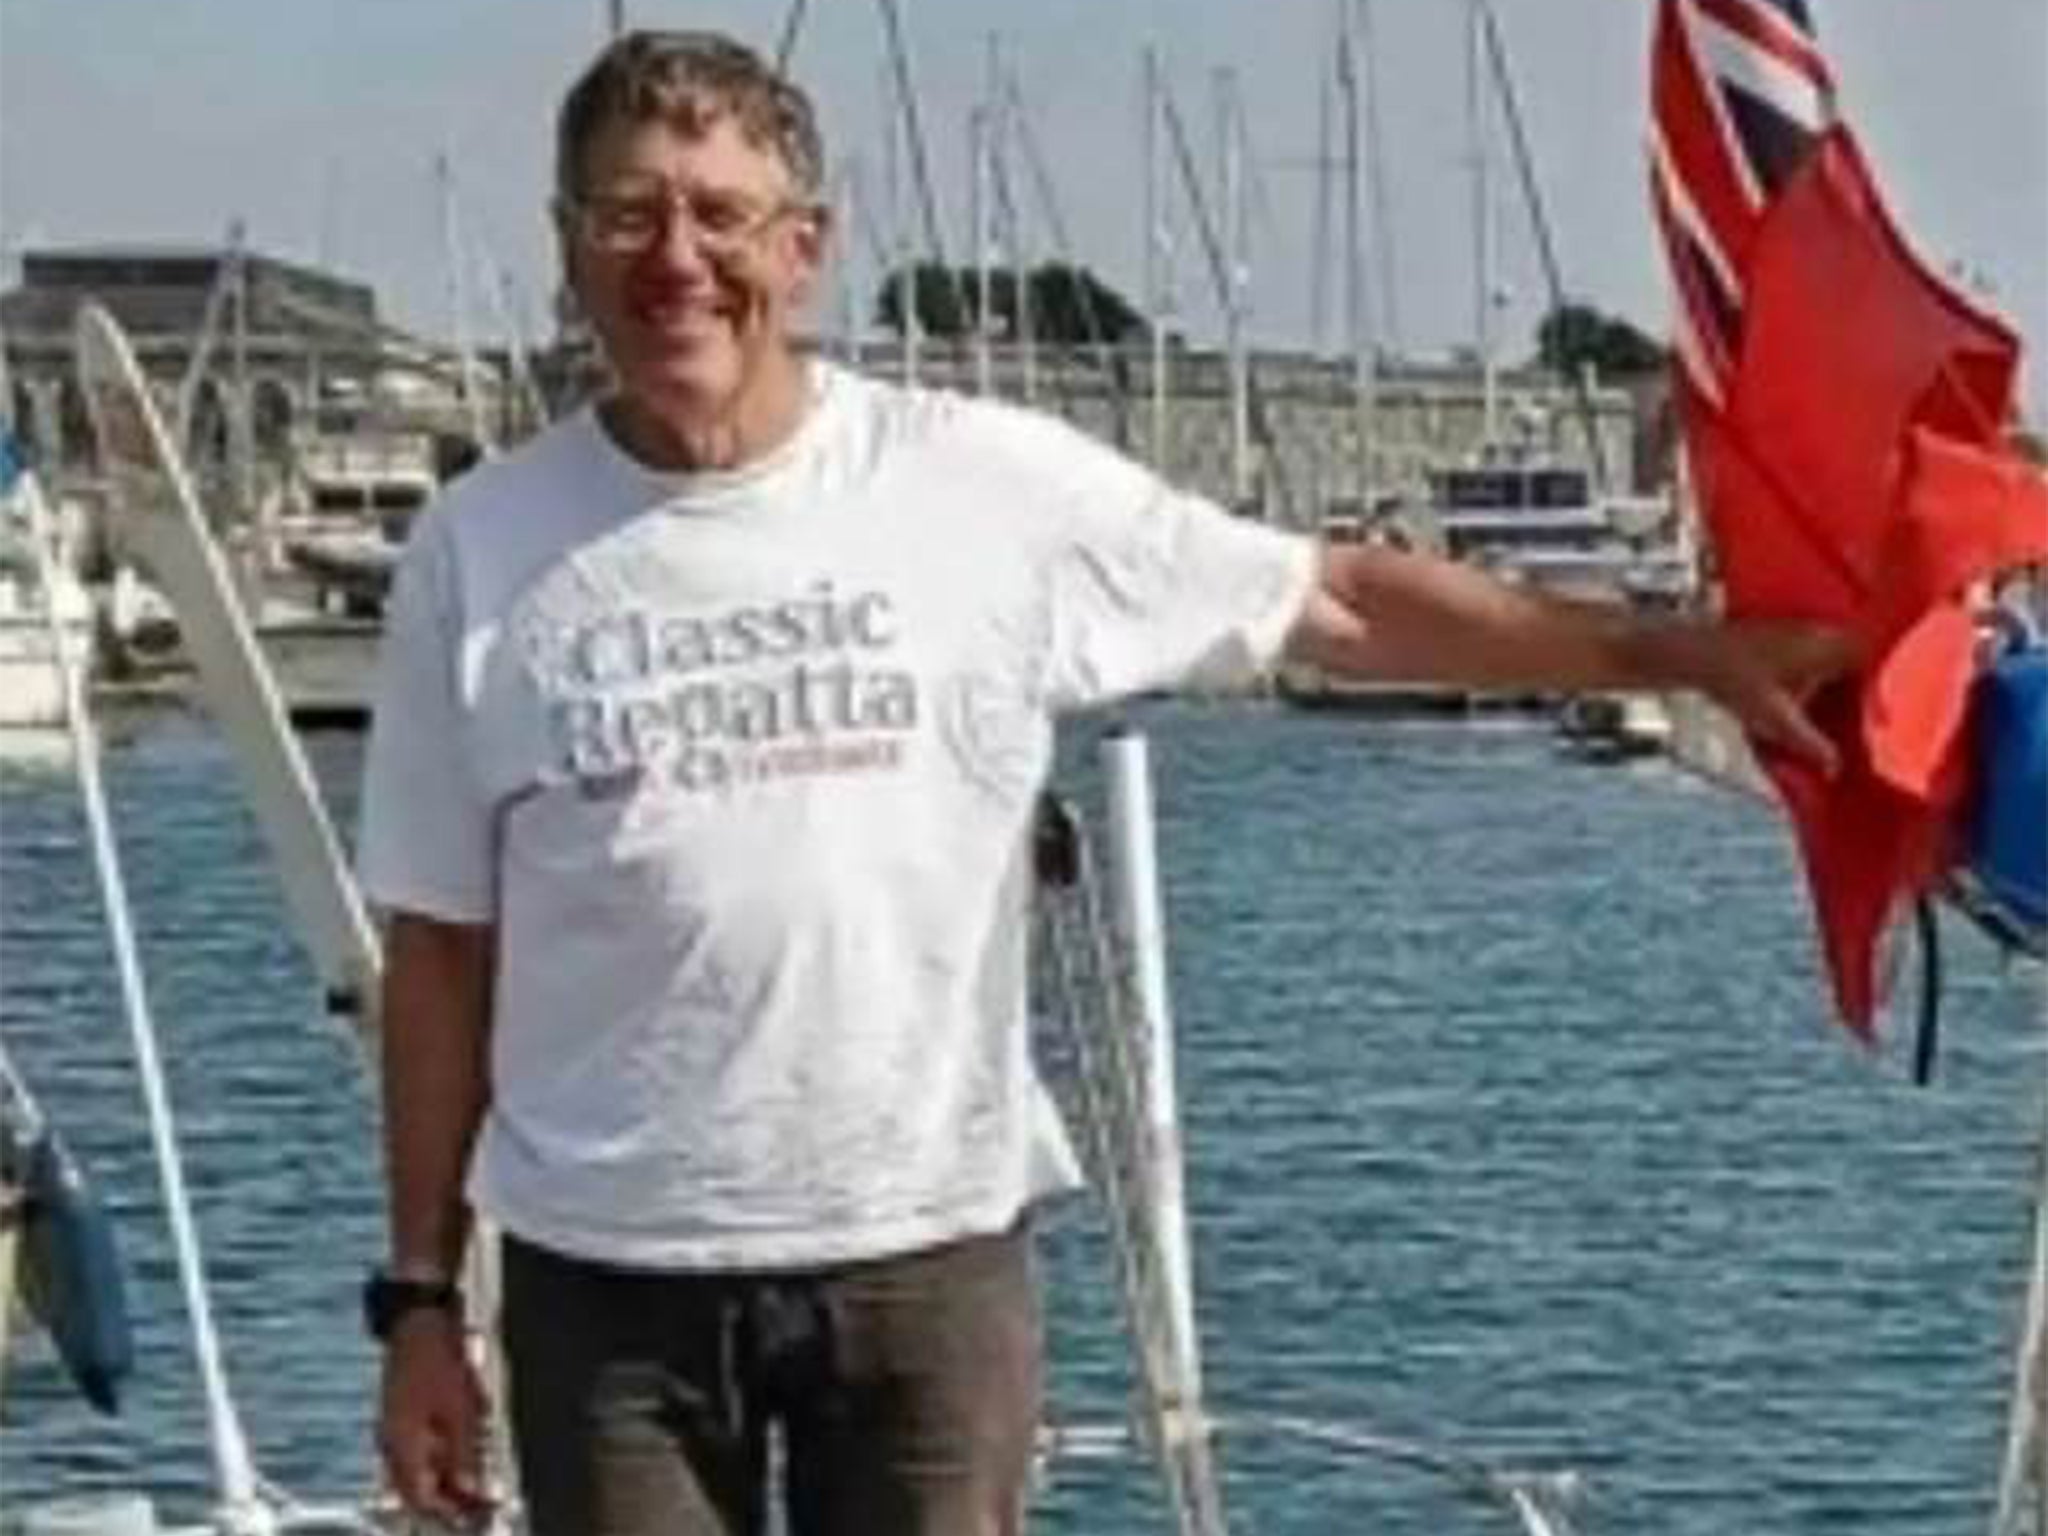 Duncan Lougee was decribed as an ‘experienced sailor’